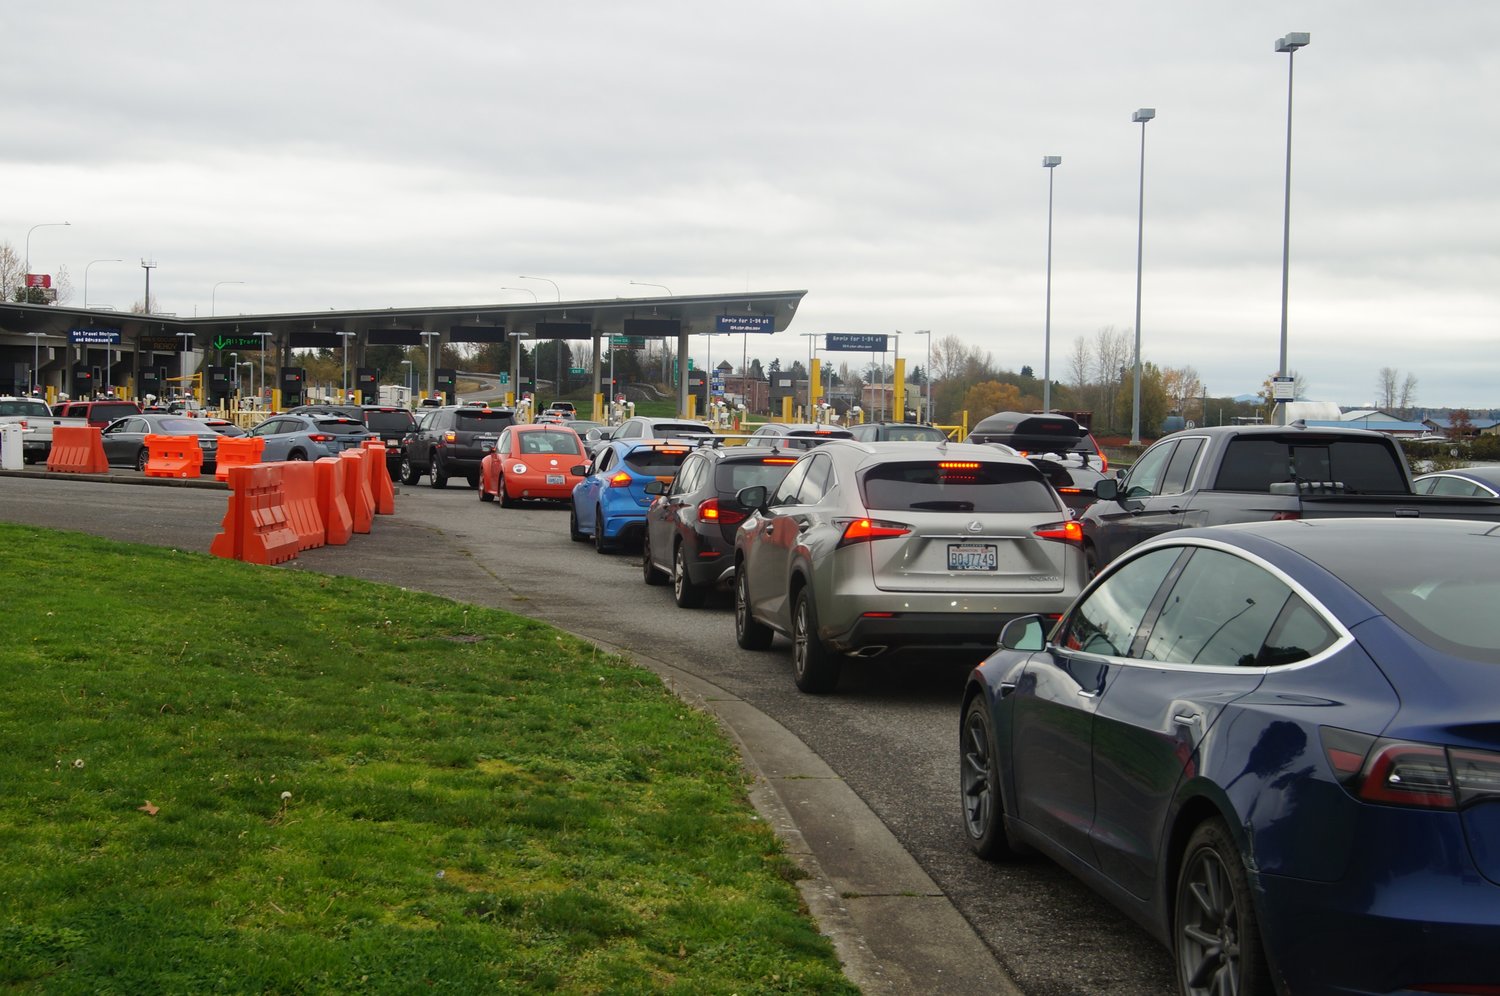 The Peace Arch border crossing had an uptick in vehicles traveling into the U.S. around 10 a.m. on November 11, 2021.